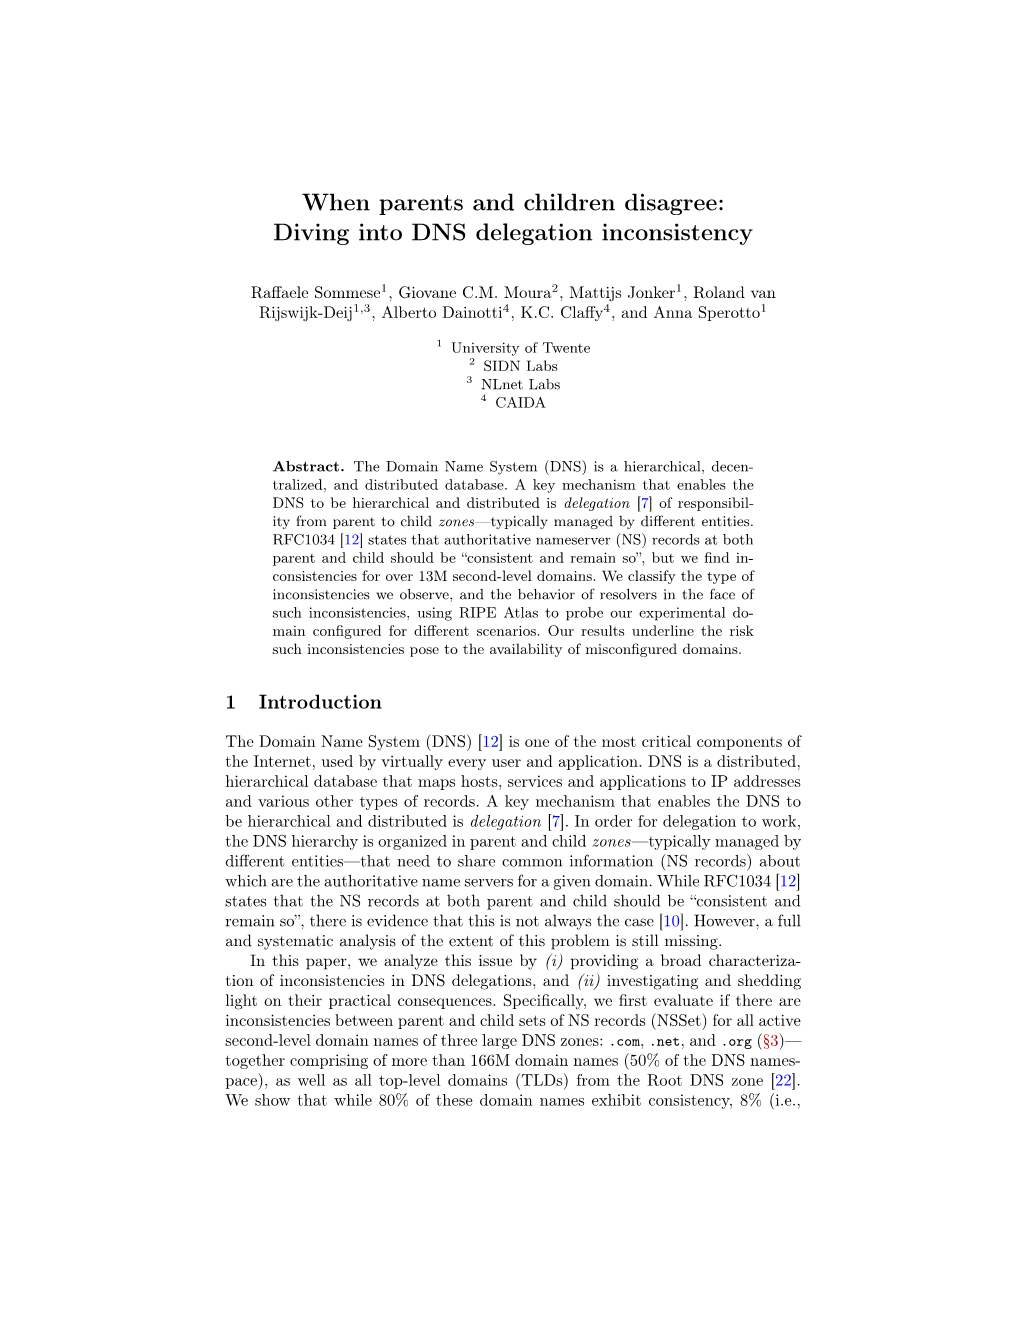 When Parents and Children Disagree: Diving Into DNS Delegation Inconsistency